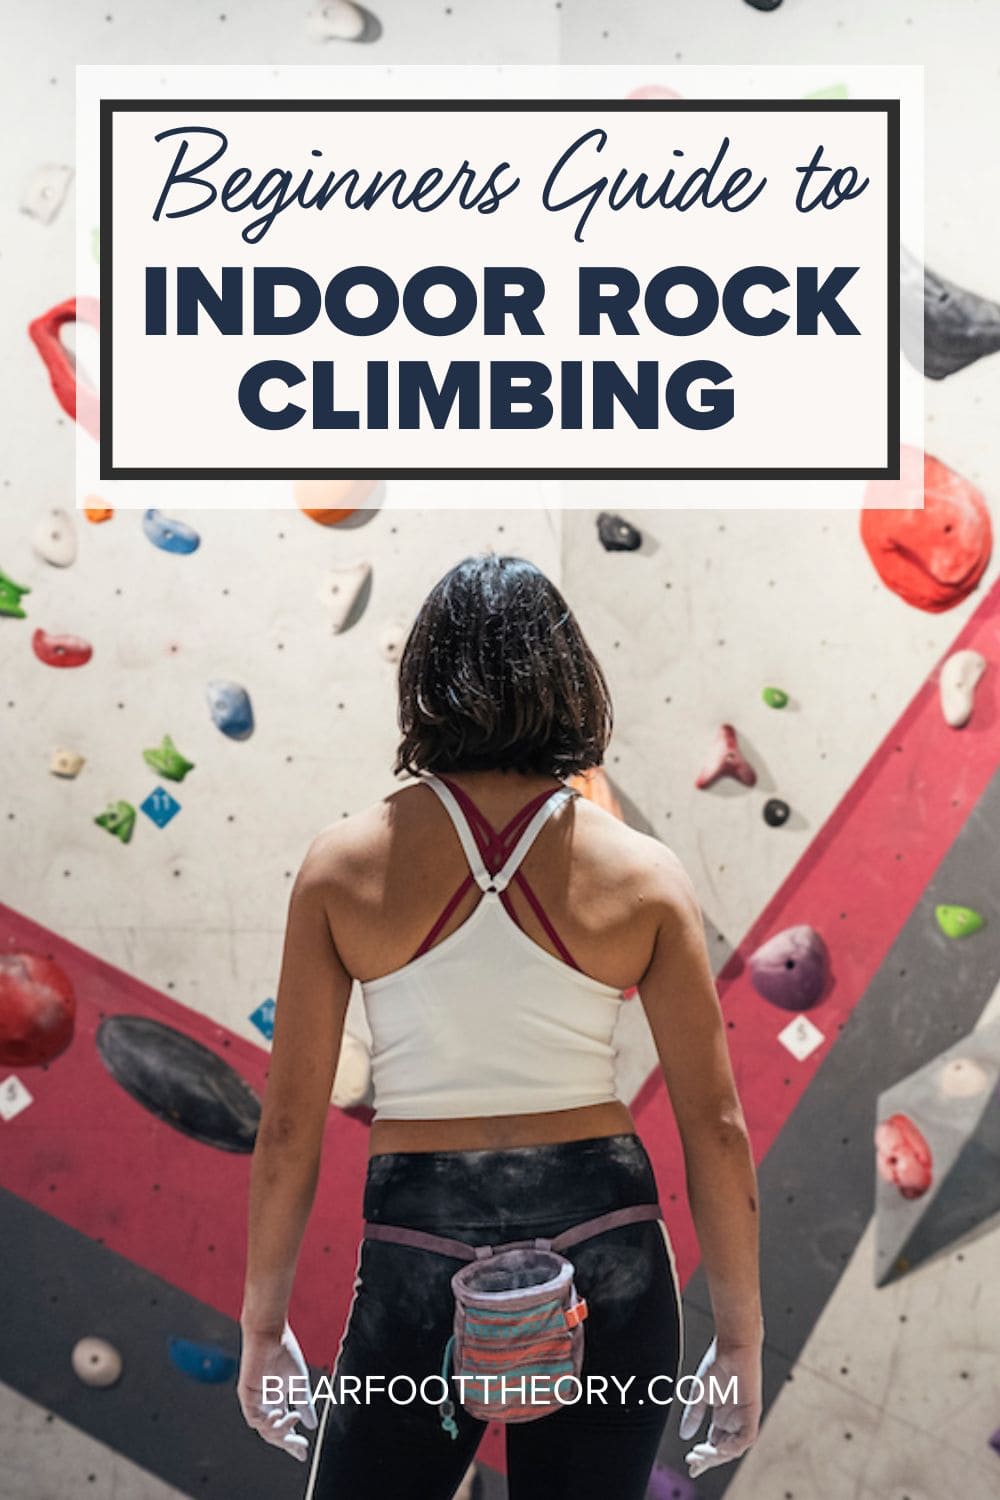 Learn what to expect on your first visit to an indoor climbing gym including types of climbing, gear recommendations, etiquette, and more!